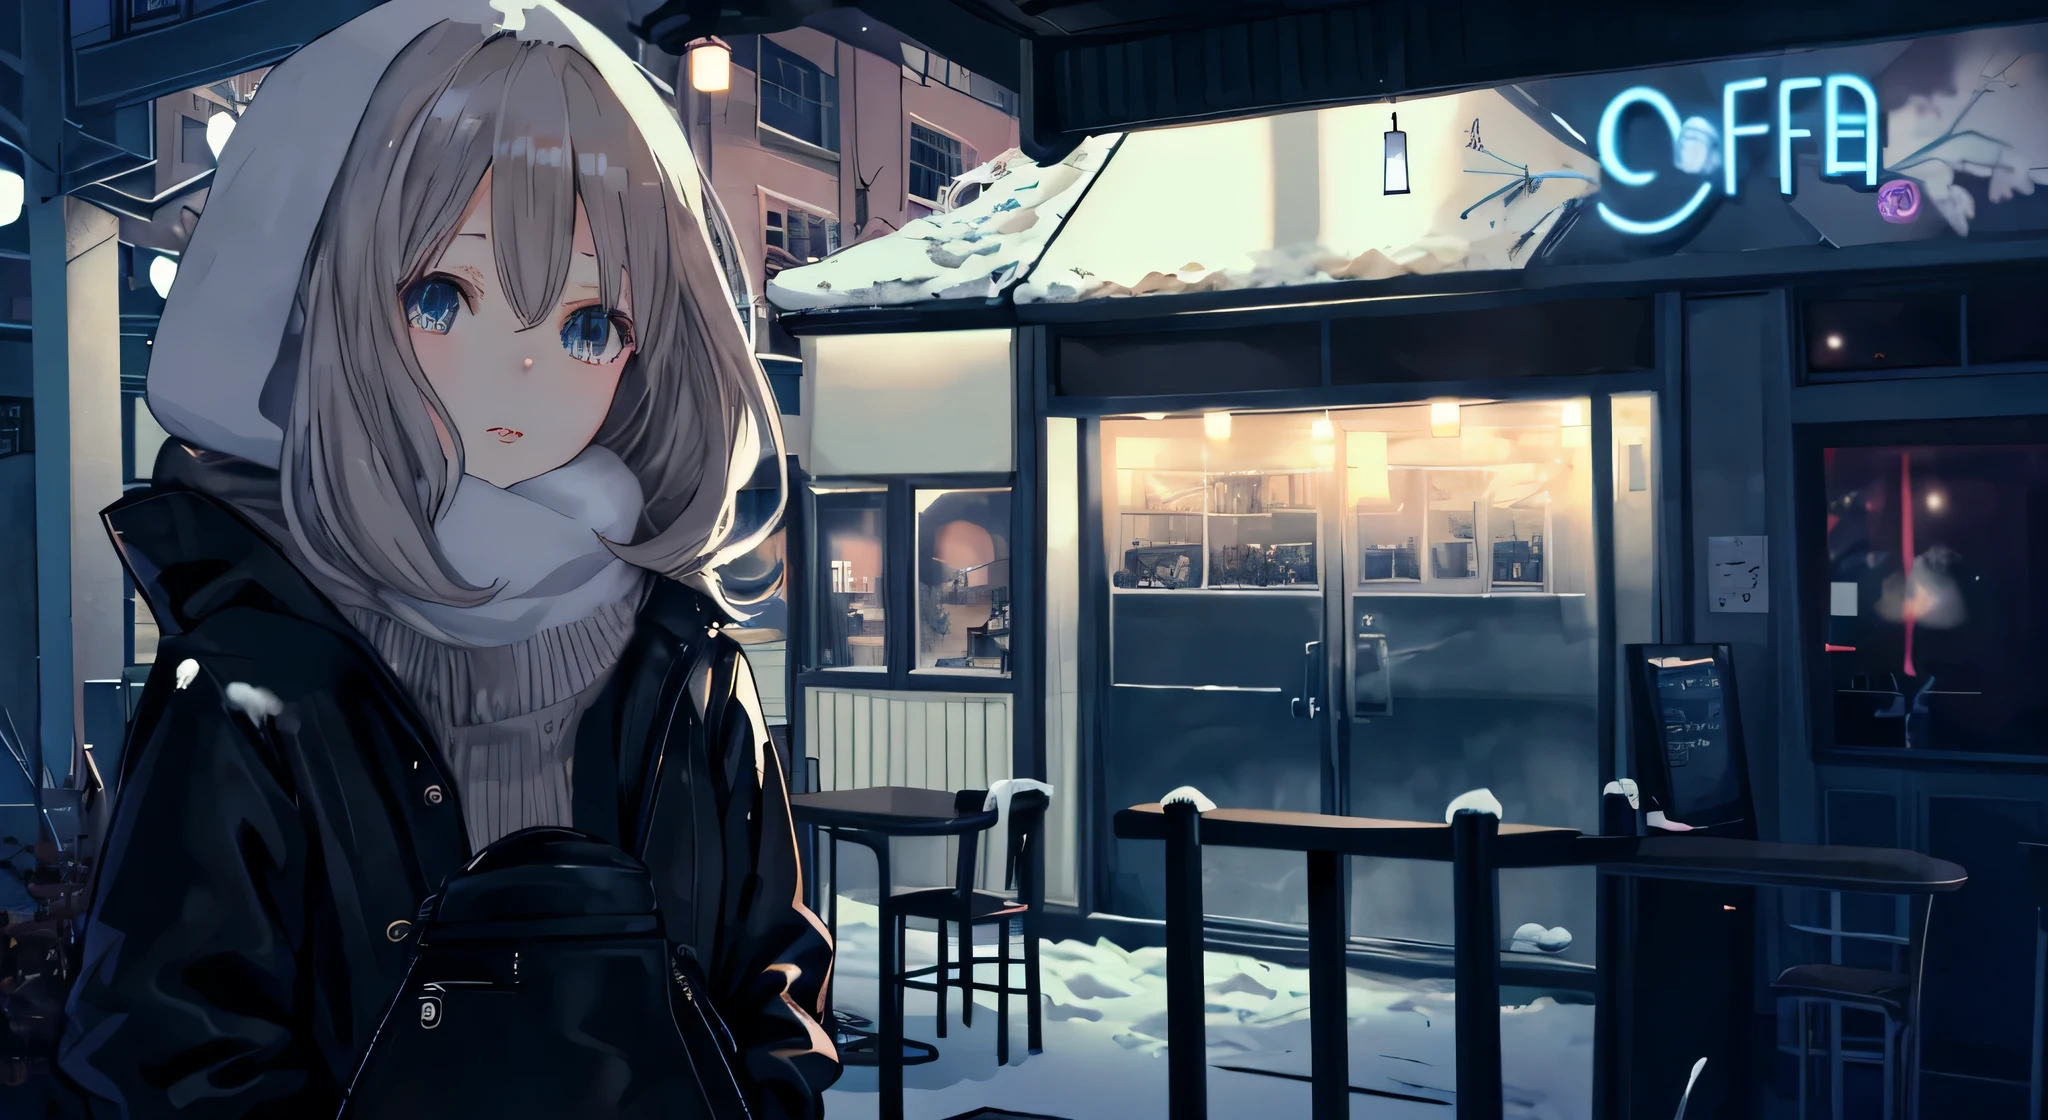 Anime girl wearing winter clothes standing in front of coffee shop,Don't draw hands， anime style 4 k, mysterious cafe girl, cold snow outside, night nucleus, 4k anime wallpaper,, anime background, anime style. 8k, anime girl desktop background, Anime visual of a cute girl, cold, anime wallpaper 4k, anime wallpaper 4k